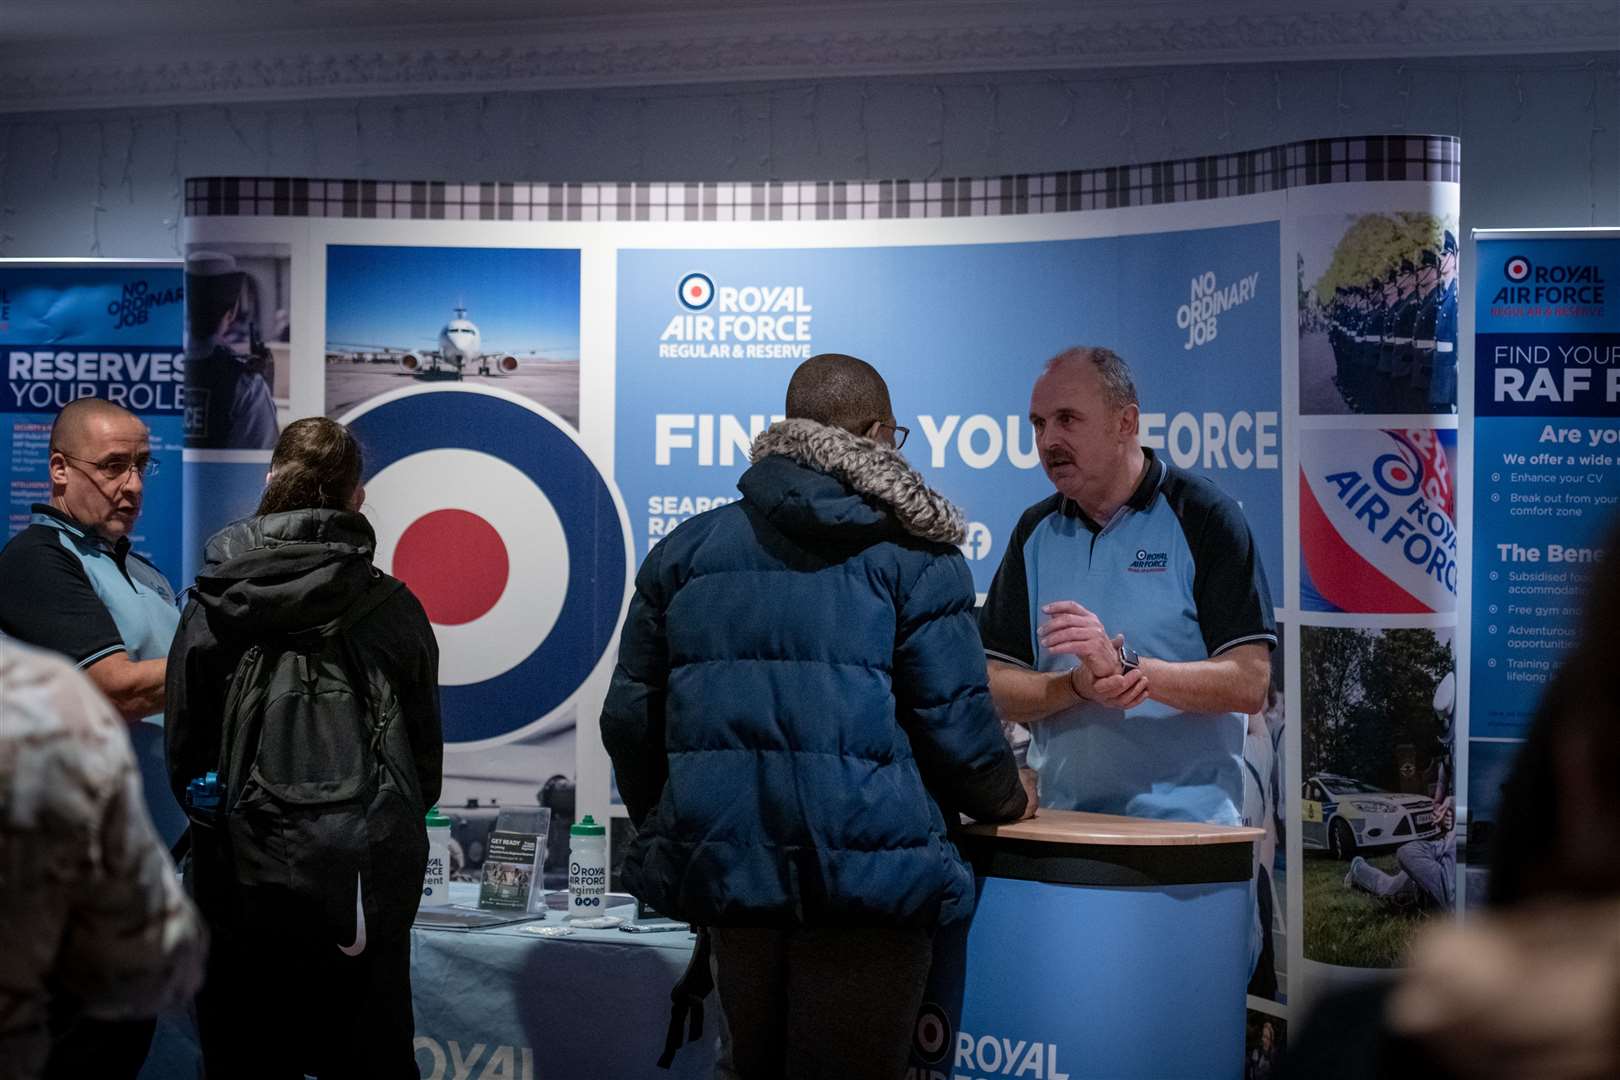 Local and National Employers Careers Fair at the Leonardo Hotel Inverness. Picture: Callum Mackay..